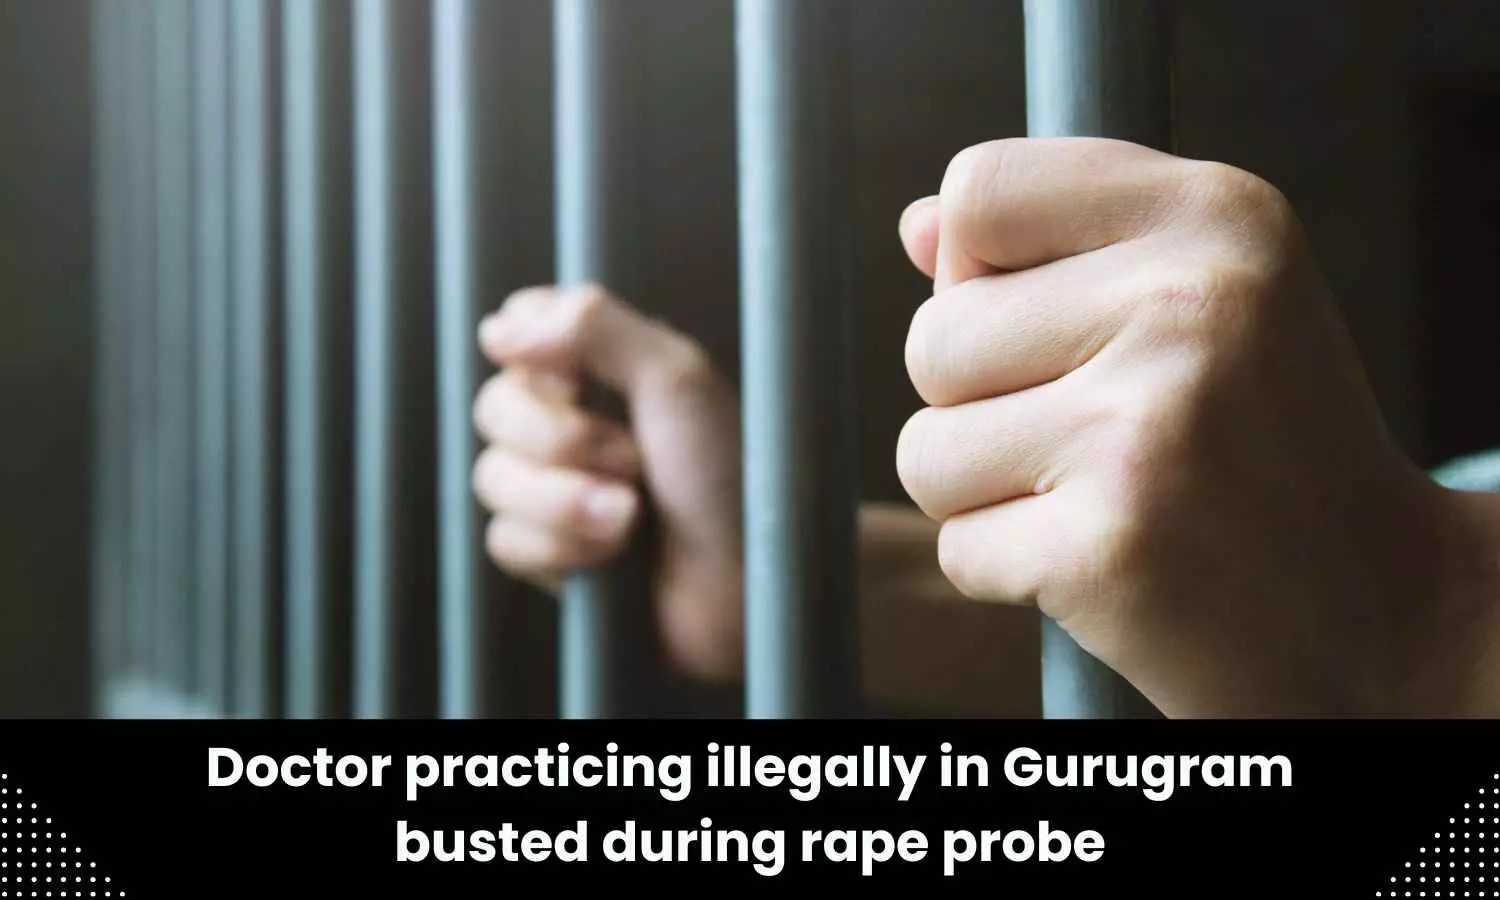 37-year-old doctor practising illegally in Gurugram, arrested